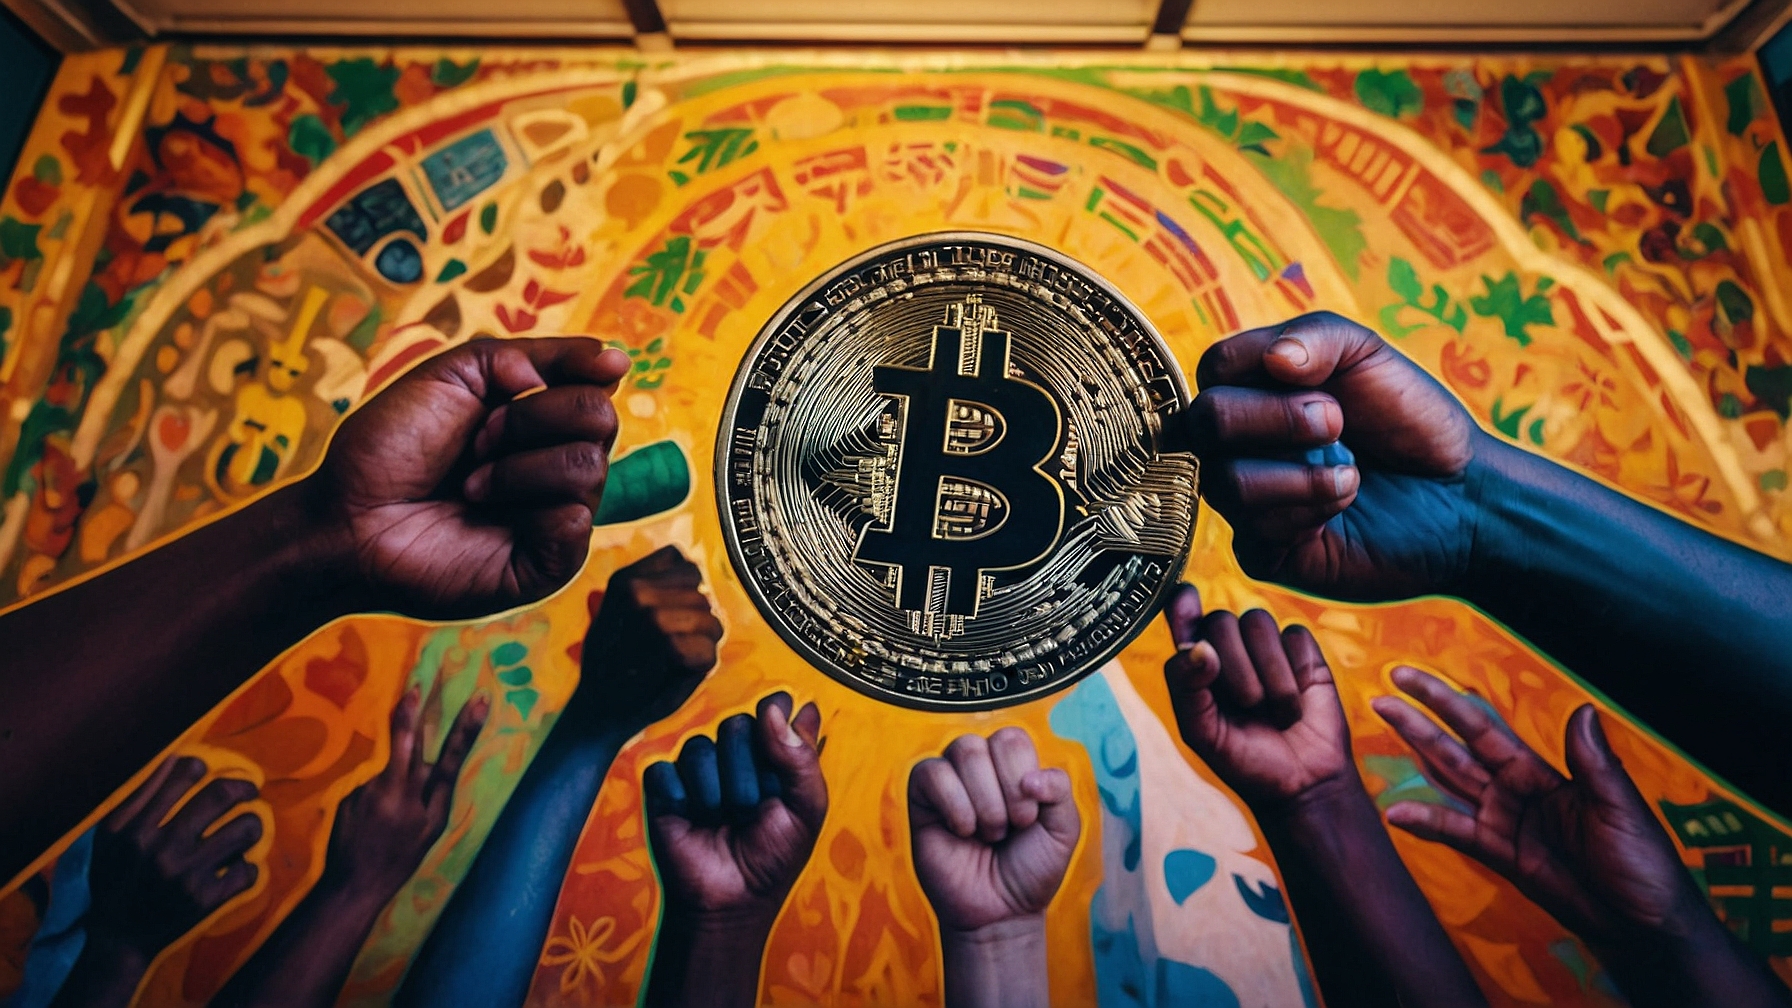 A vibrant mural depicting diverse hands lifting a Bitcoin, symbolizing unity and financial empowerment across a multicultural society.